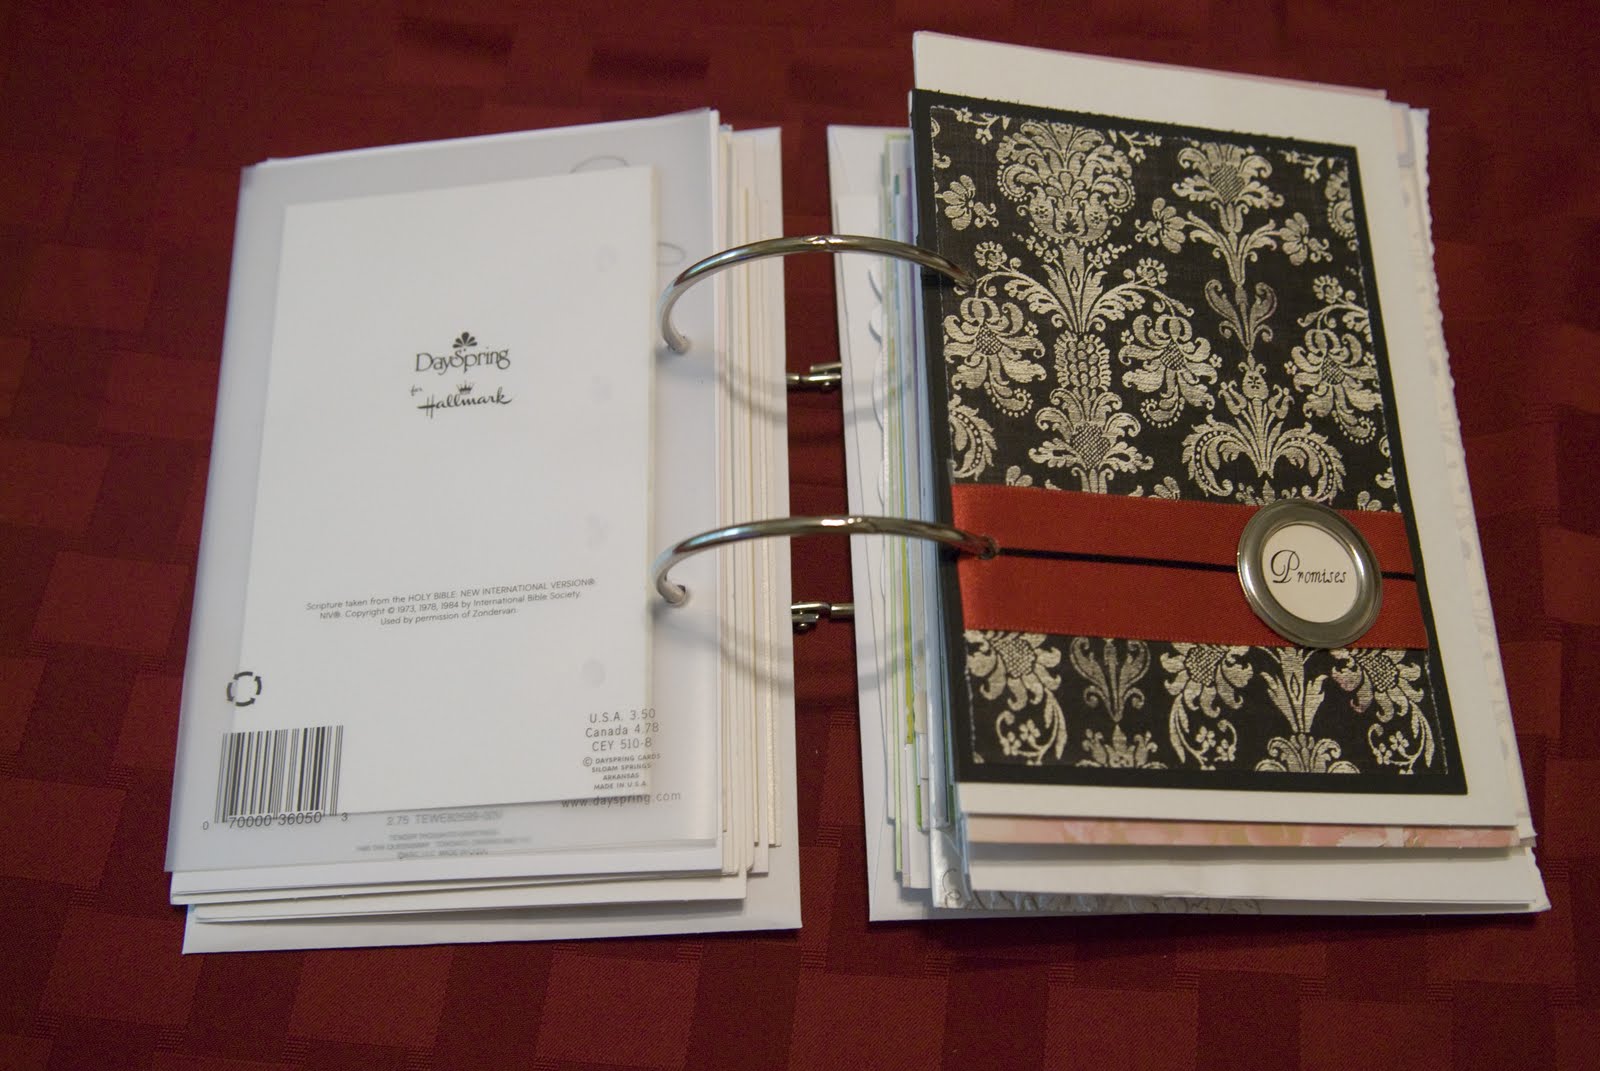 Our Trek: What to Do with Greeting Cards: My DIY Wedding Card Album